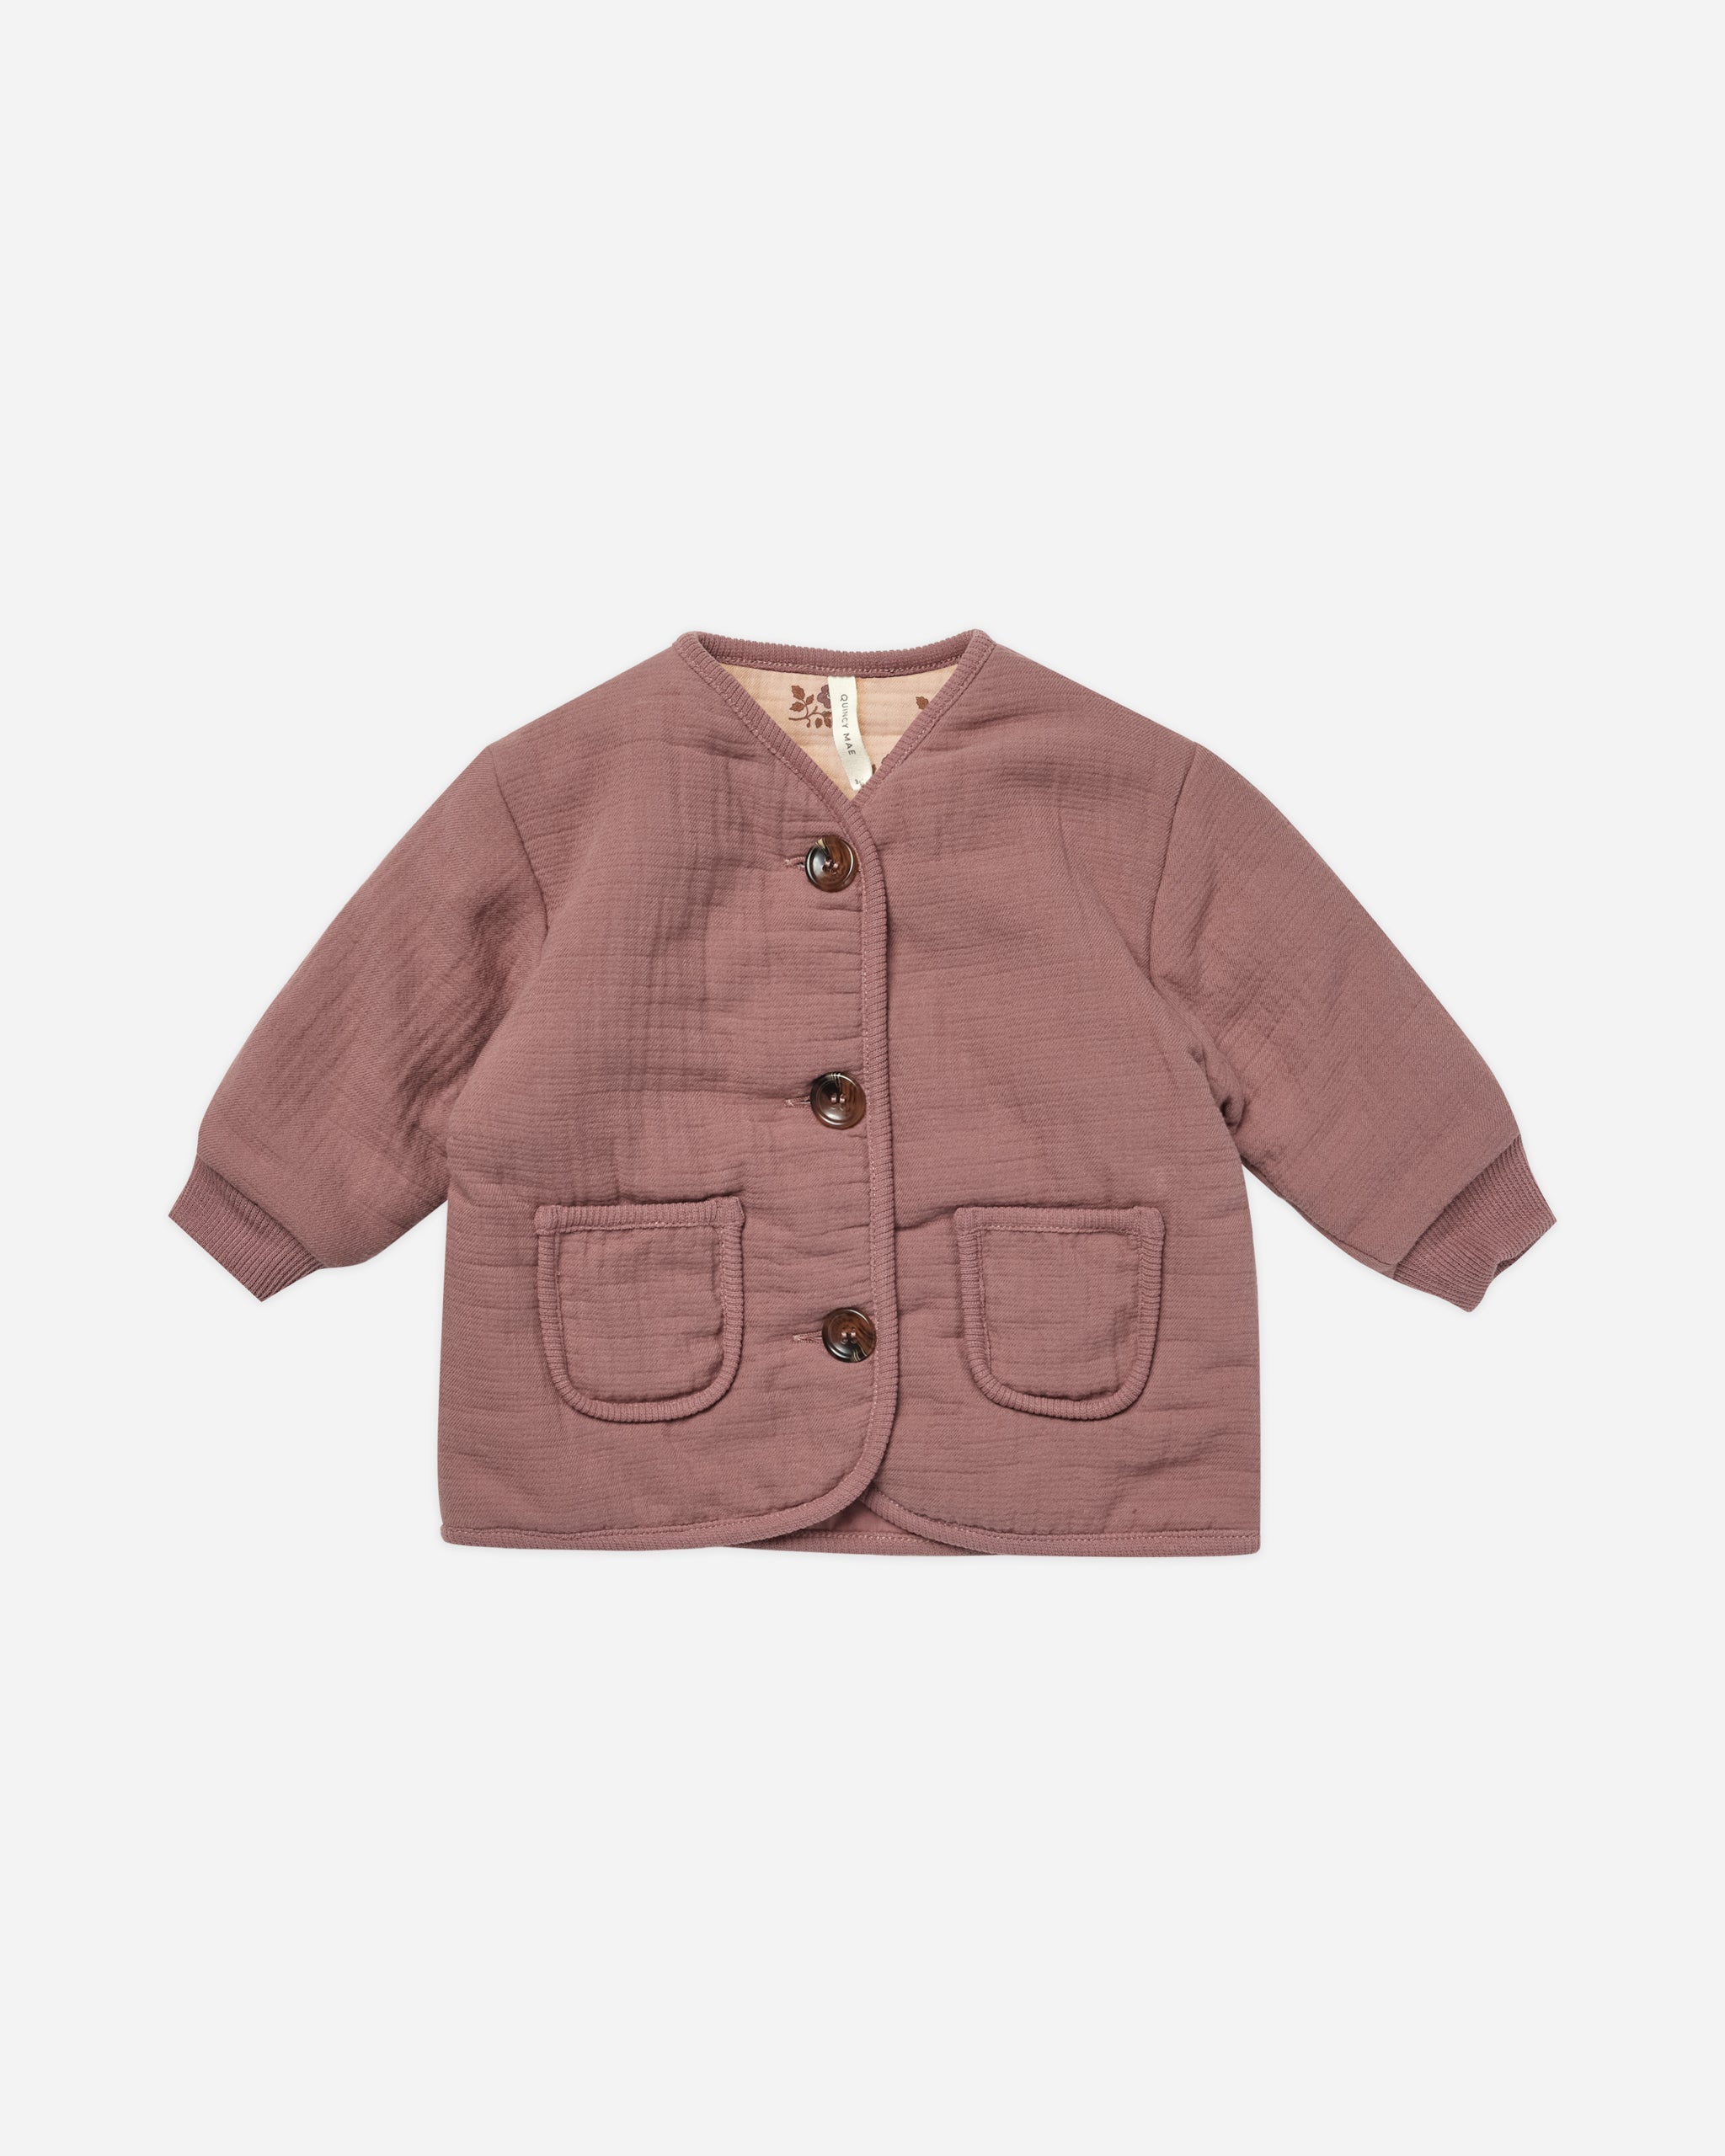 Quilted V-Neck Button Jacket || Fig - Rylee + Cru | Kids Clothes | Trendy Baby Clothes | Modern Infant Outfits |